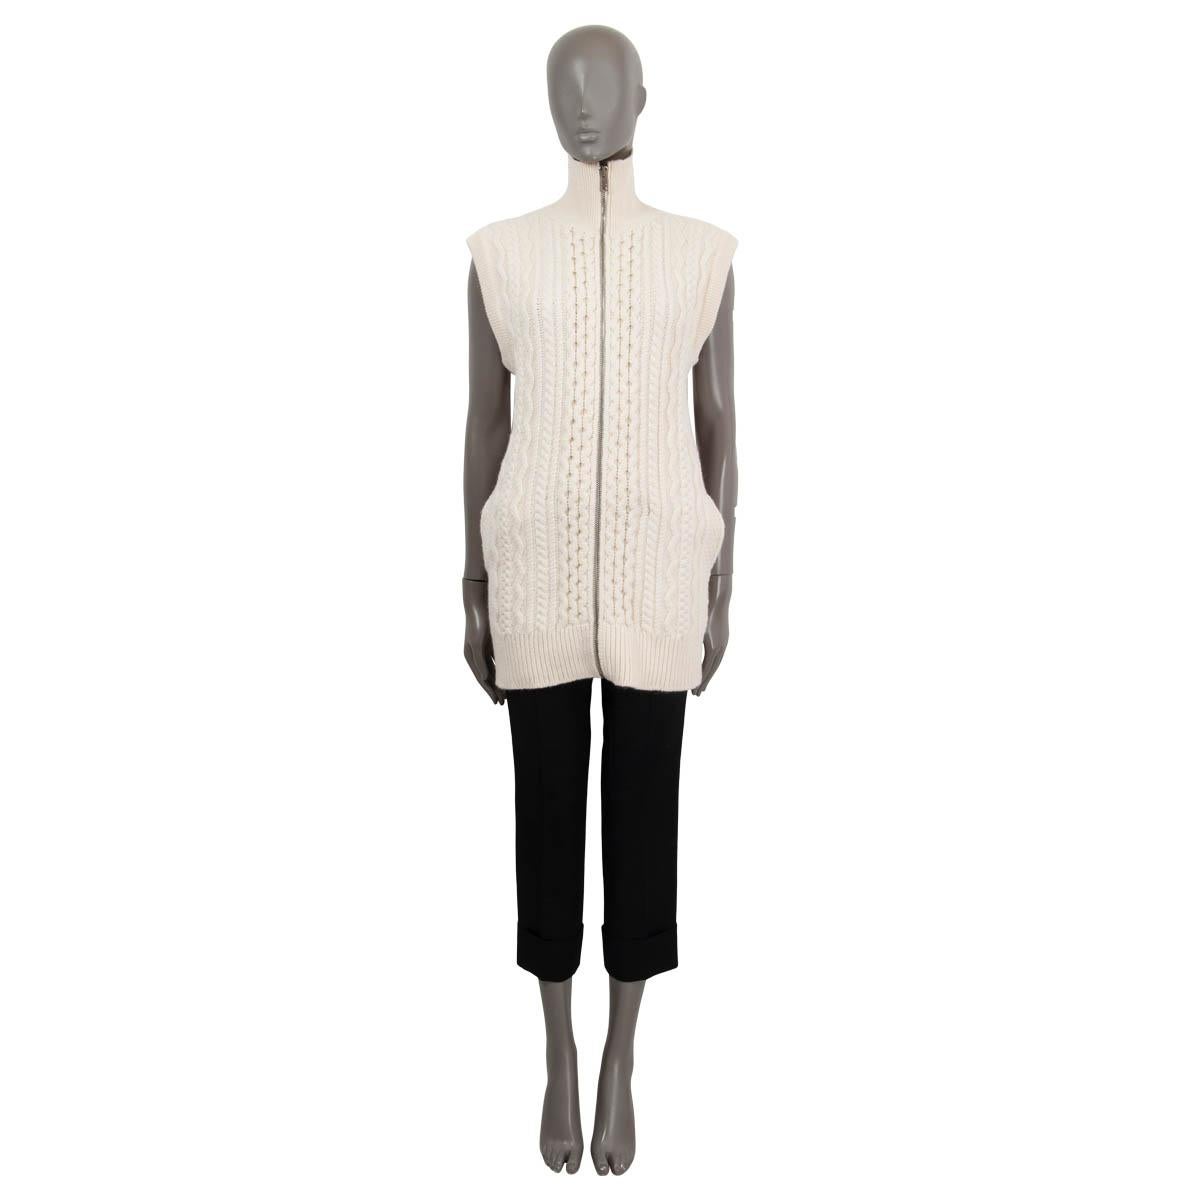 100% authentic Chloé cable kni vest in vanilla ice wool (72%), alpaca (24%) and polyamide (4%) with a technical fabric part on the back in vanilla ice viscose (93%), polyamide (6%) and elastane (1%). Features two side slit pockets and a high neck.